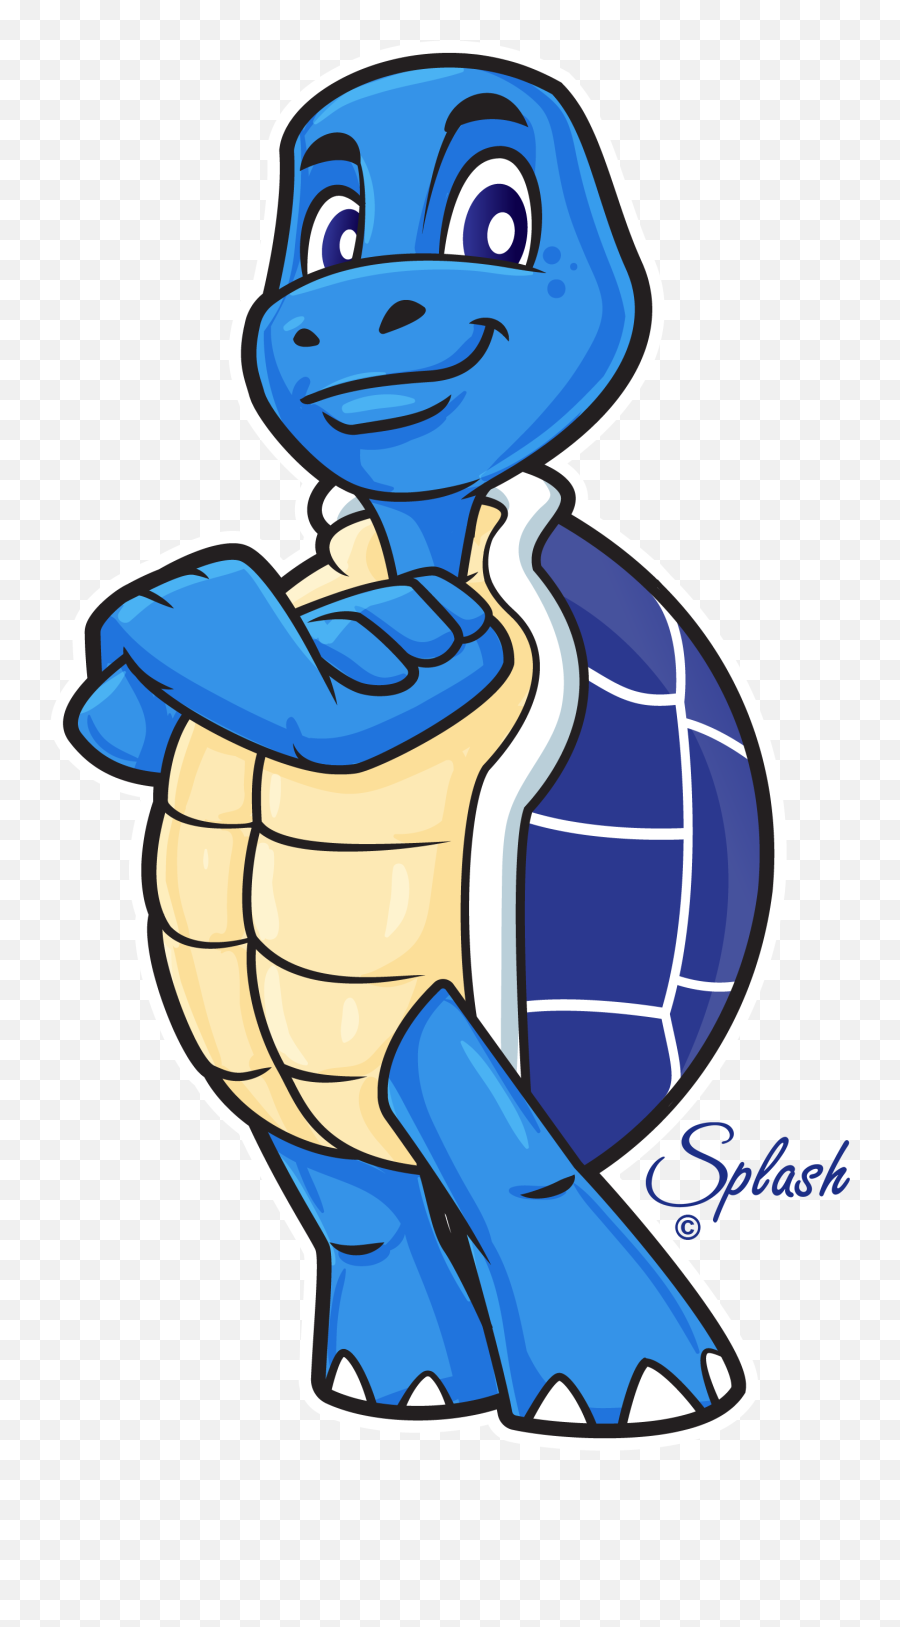 Our Menu Blue Turtle Express Emoji,How To Make A Turtle Emoticon On Facebook